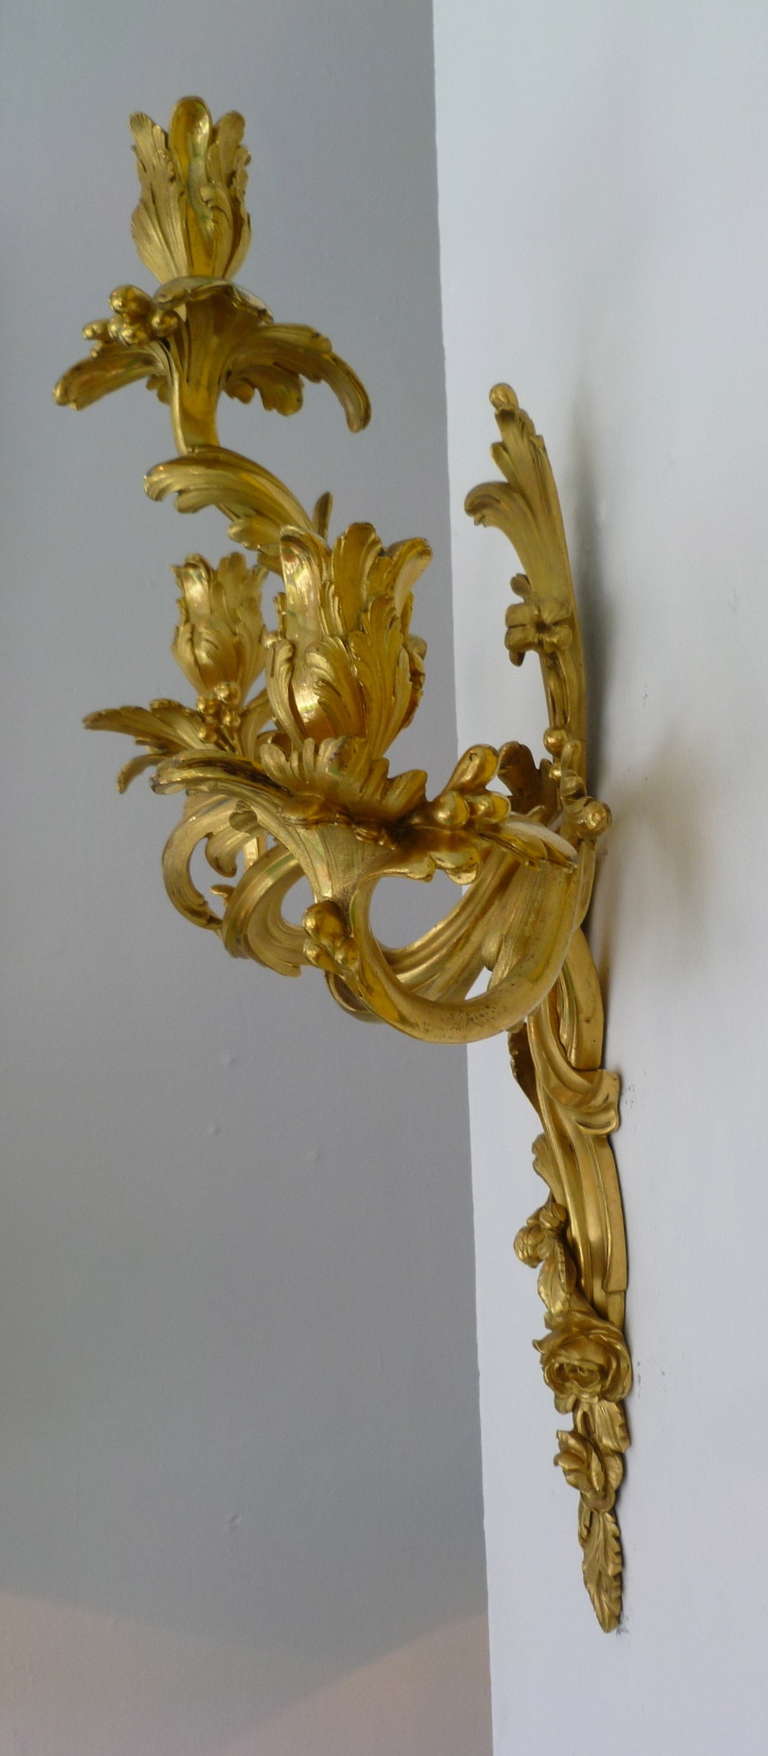 Pair French Louis XV style Rococo ormolu wall sconces in the manner of Jacques Caffieri c.1850
Finely cast and chased, and of the highest quality, these exquisite wall sconces are designed with continuous scrolling foliate branches, terminating in